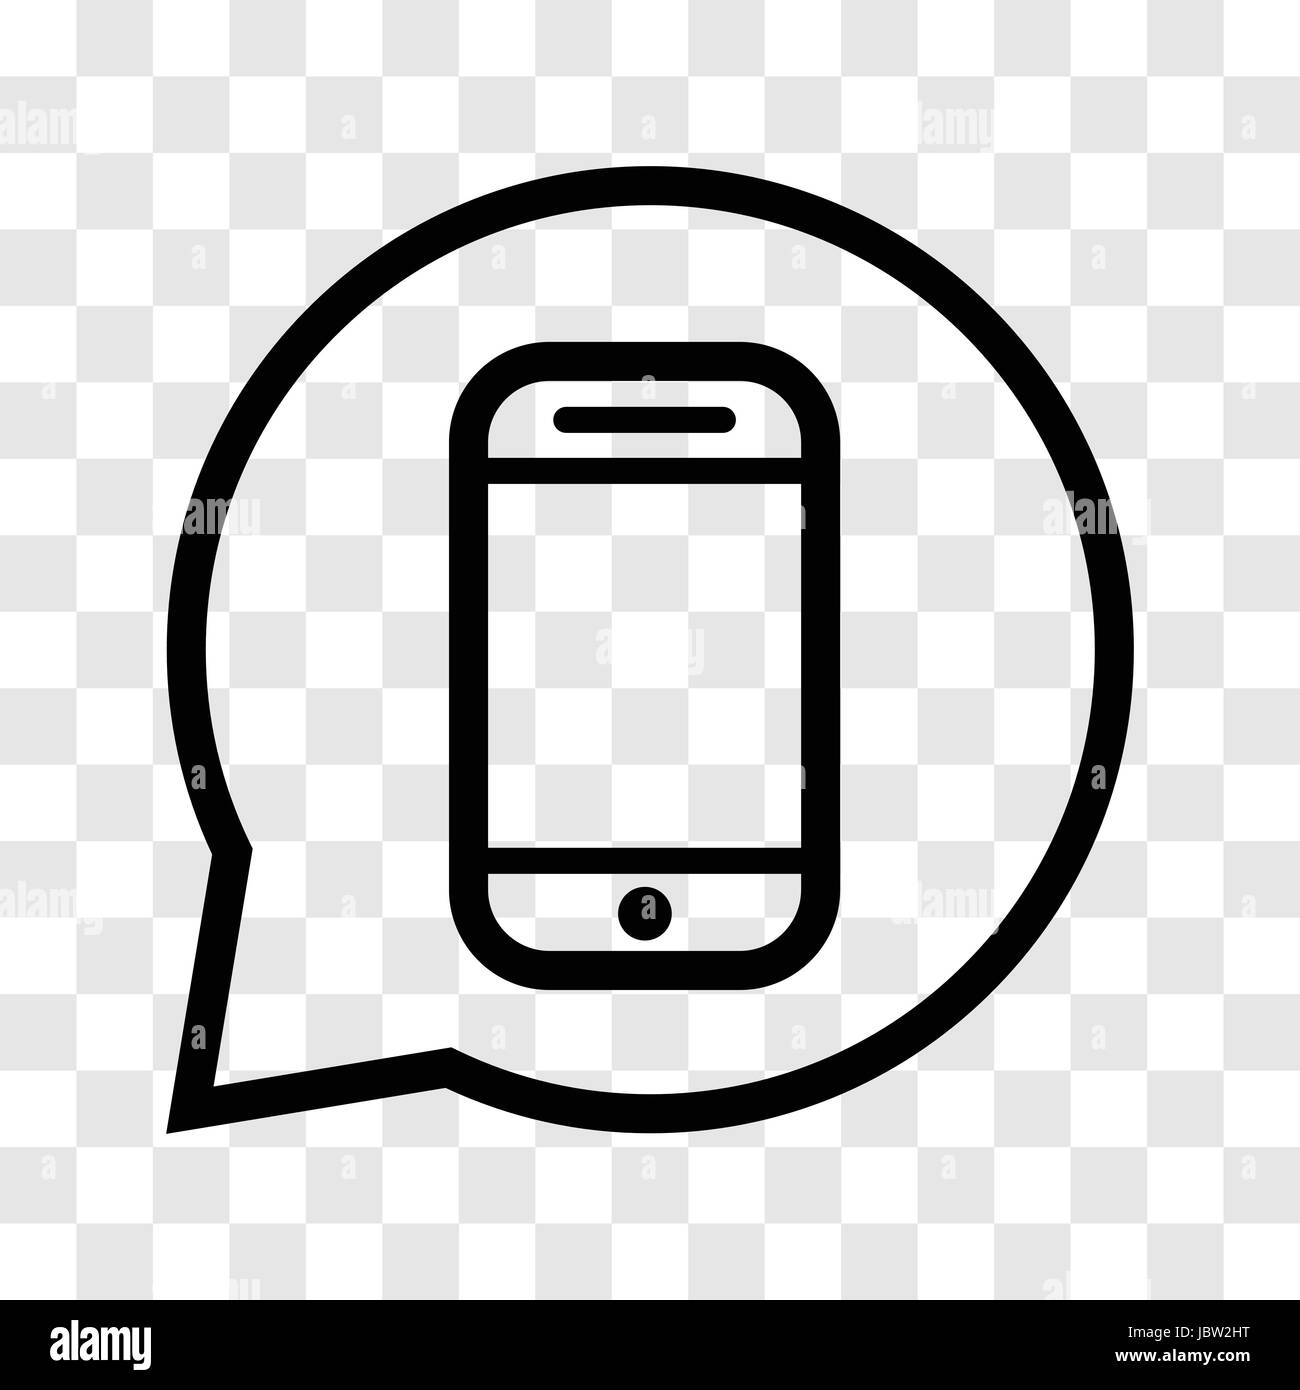 Mobile rounded icon. iconic symbol inside a speech bubble, on transparency grid.  Vector Iconic Design. Stock Vector